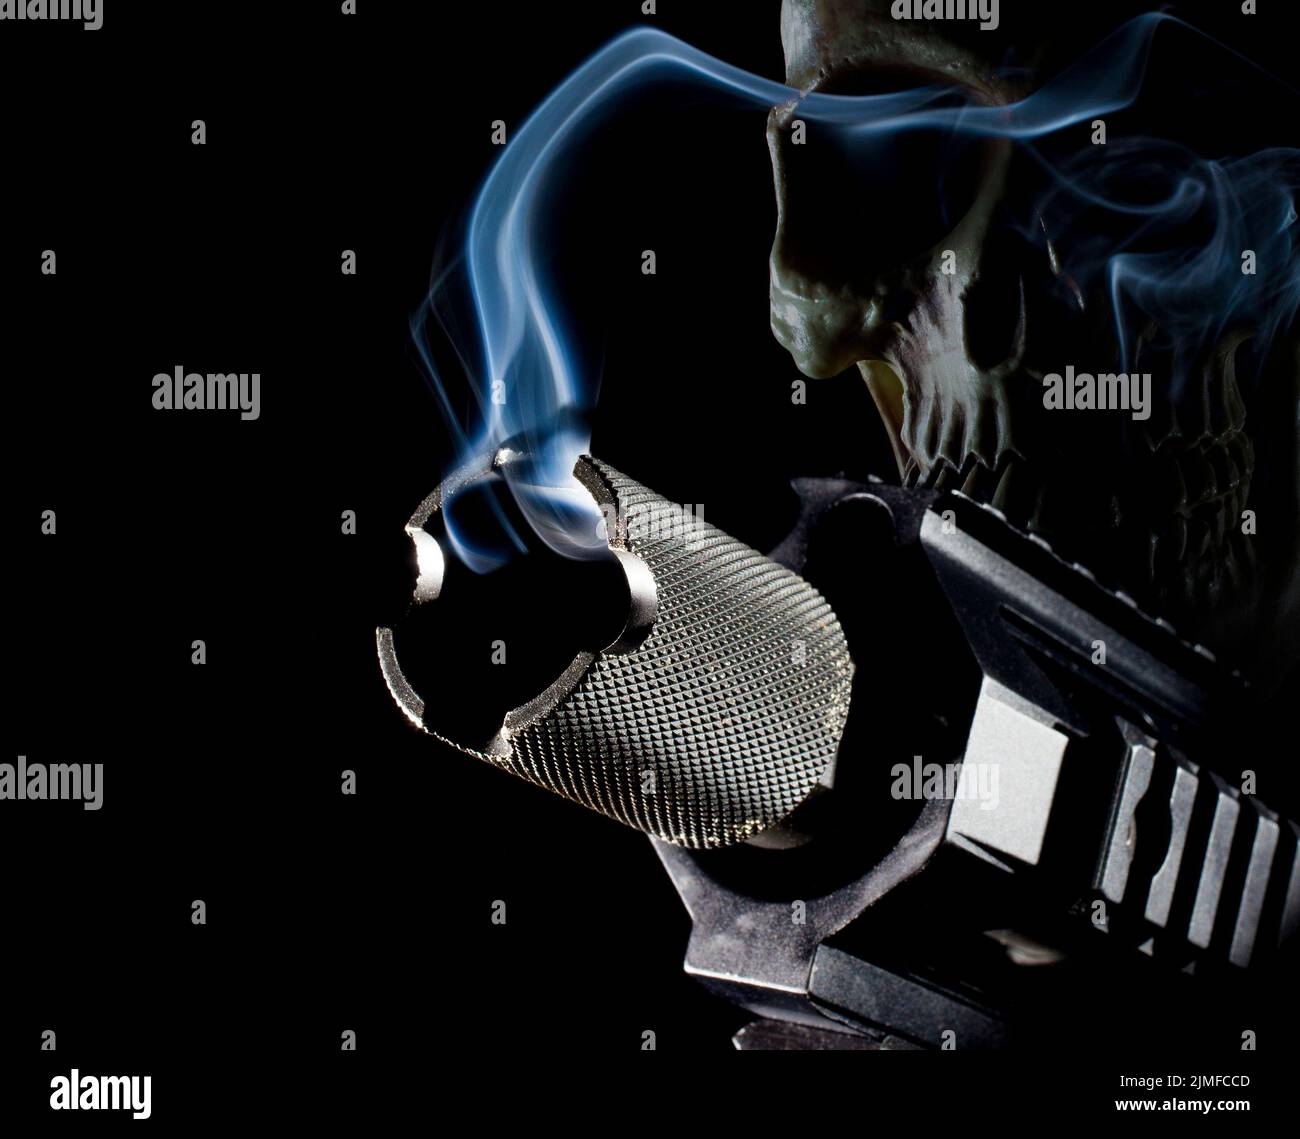 Ghost gun 3D illustration with a smoking gun in front and skul behind on a black background Stock Photo